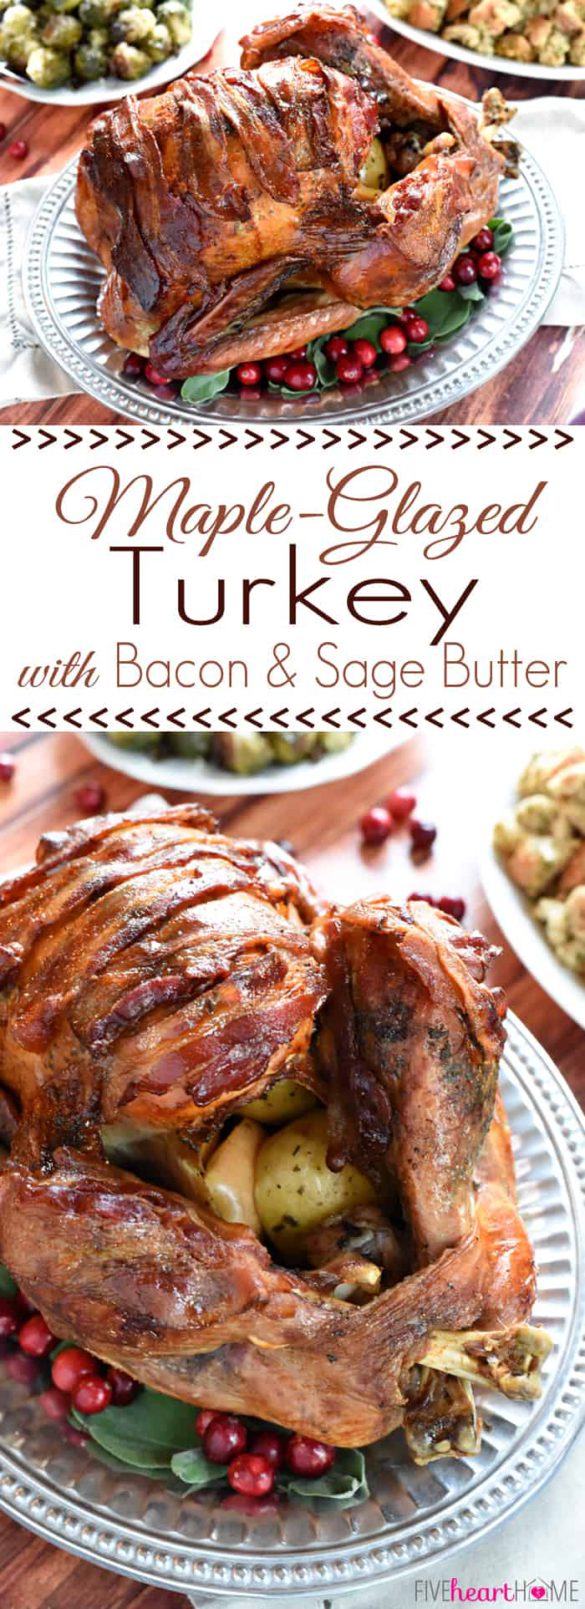 20 Thanksgiving Turkey Recipes For The Perfect Roast - The Daily Spice